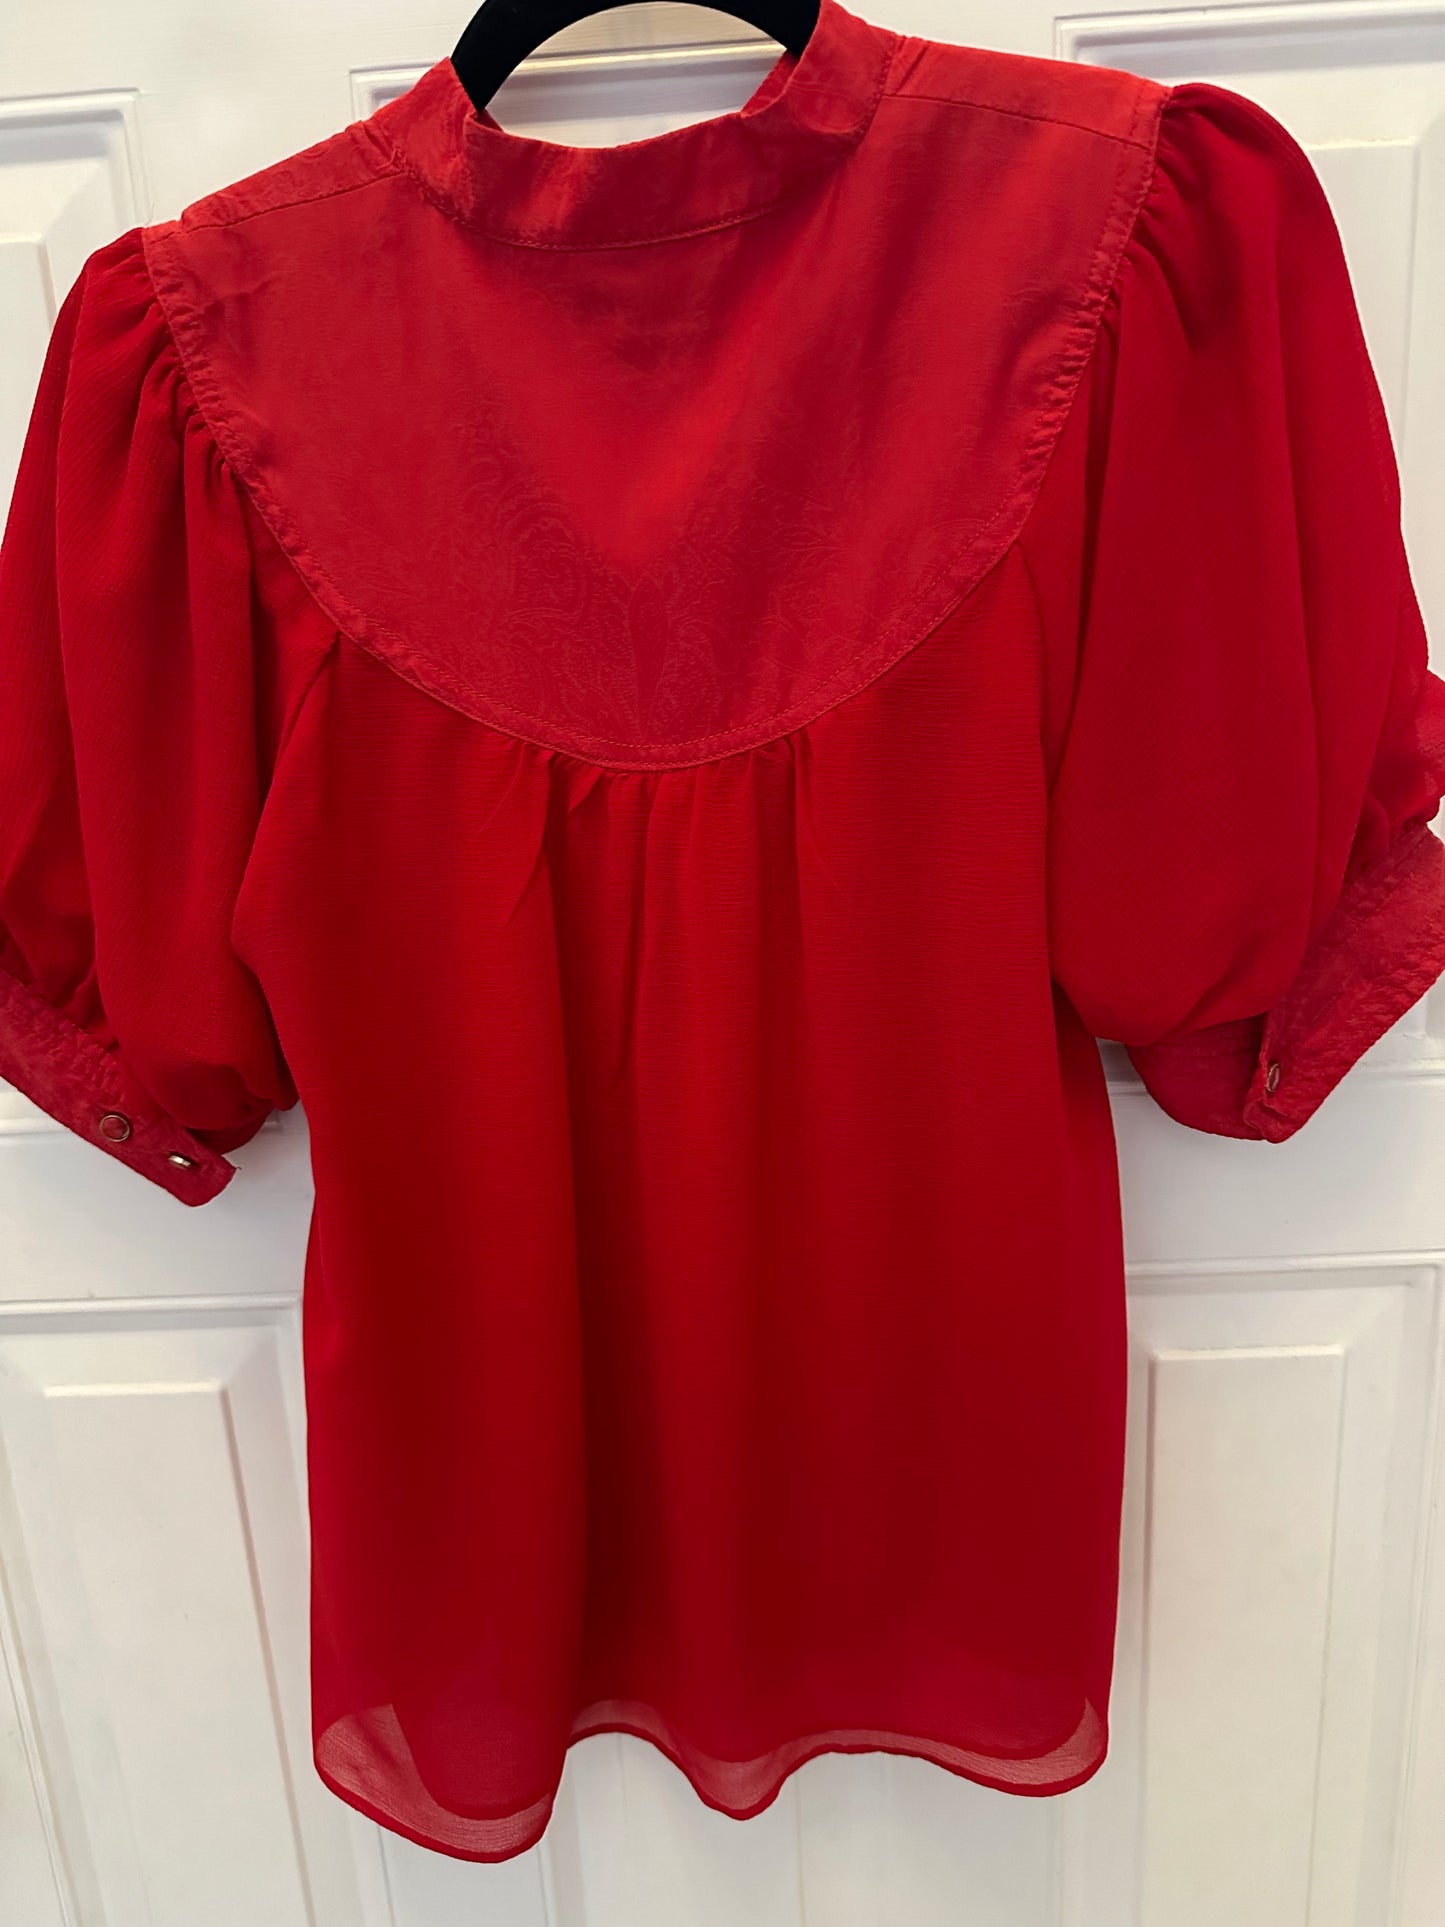 Maeve Anthropologie Women’s Red Sz 6 Top Blouse